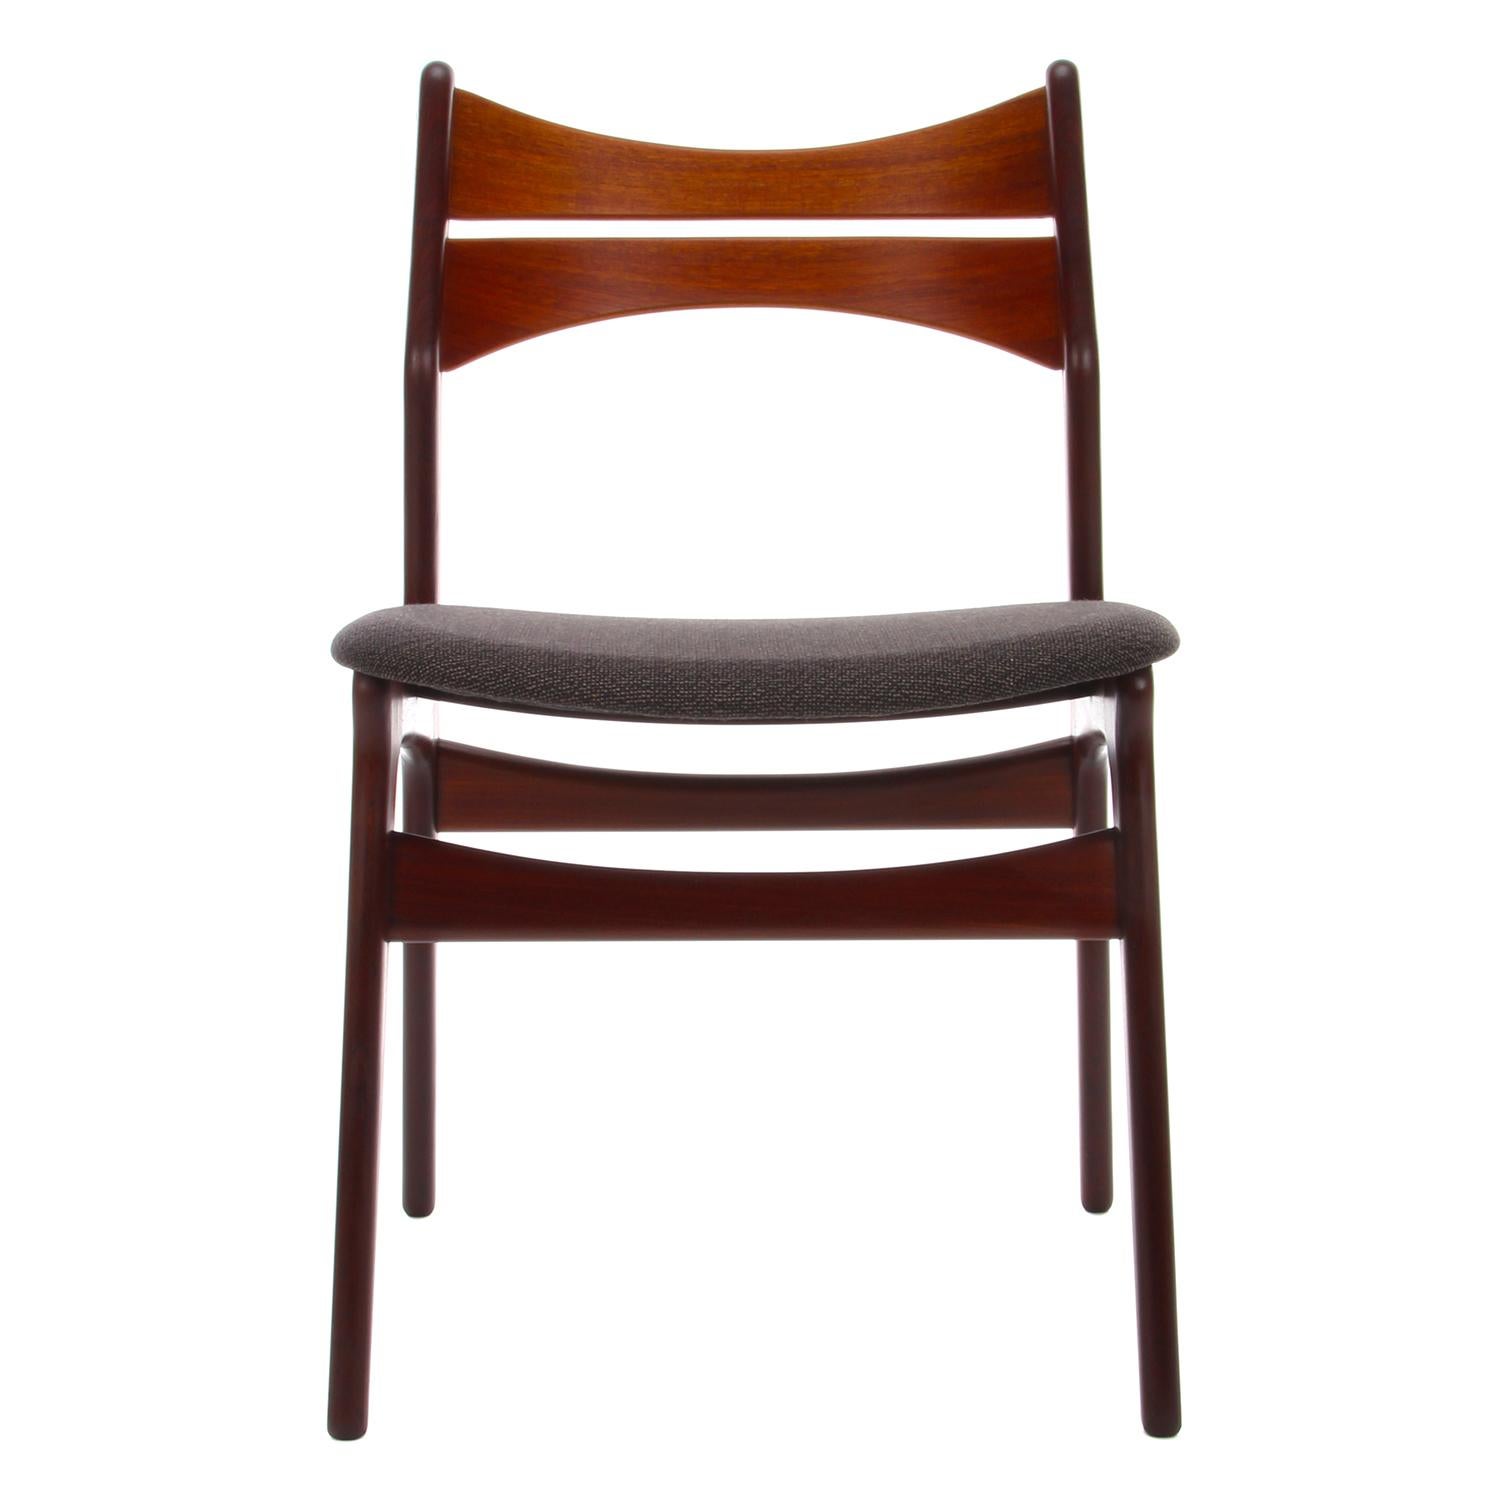 Model 310 by Erik Buch - captivating Scandinavian Modern dark wood and teak dining chair designed ca. 1960 (first mentioned in the Danish design magazine, Mobilia in 1961) and produced at Christian Christensens Møbelfabrik - gently restored and